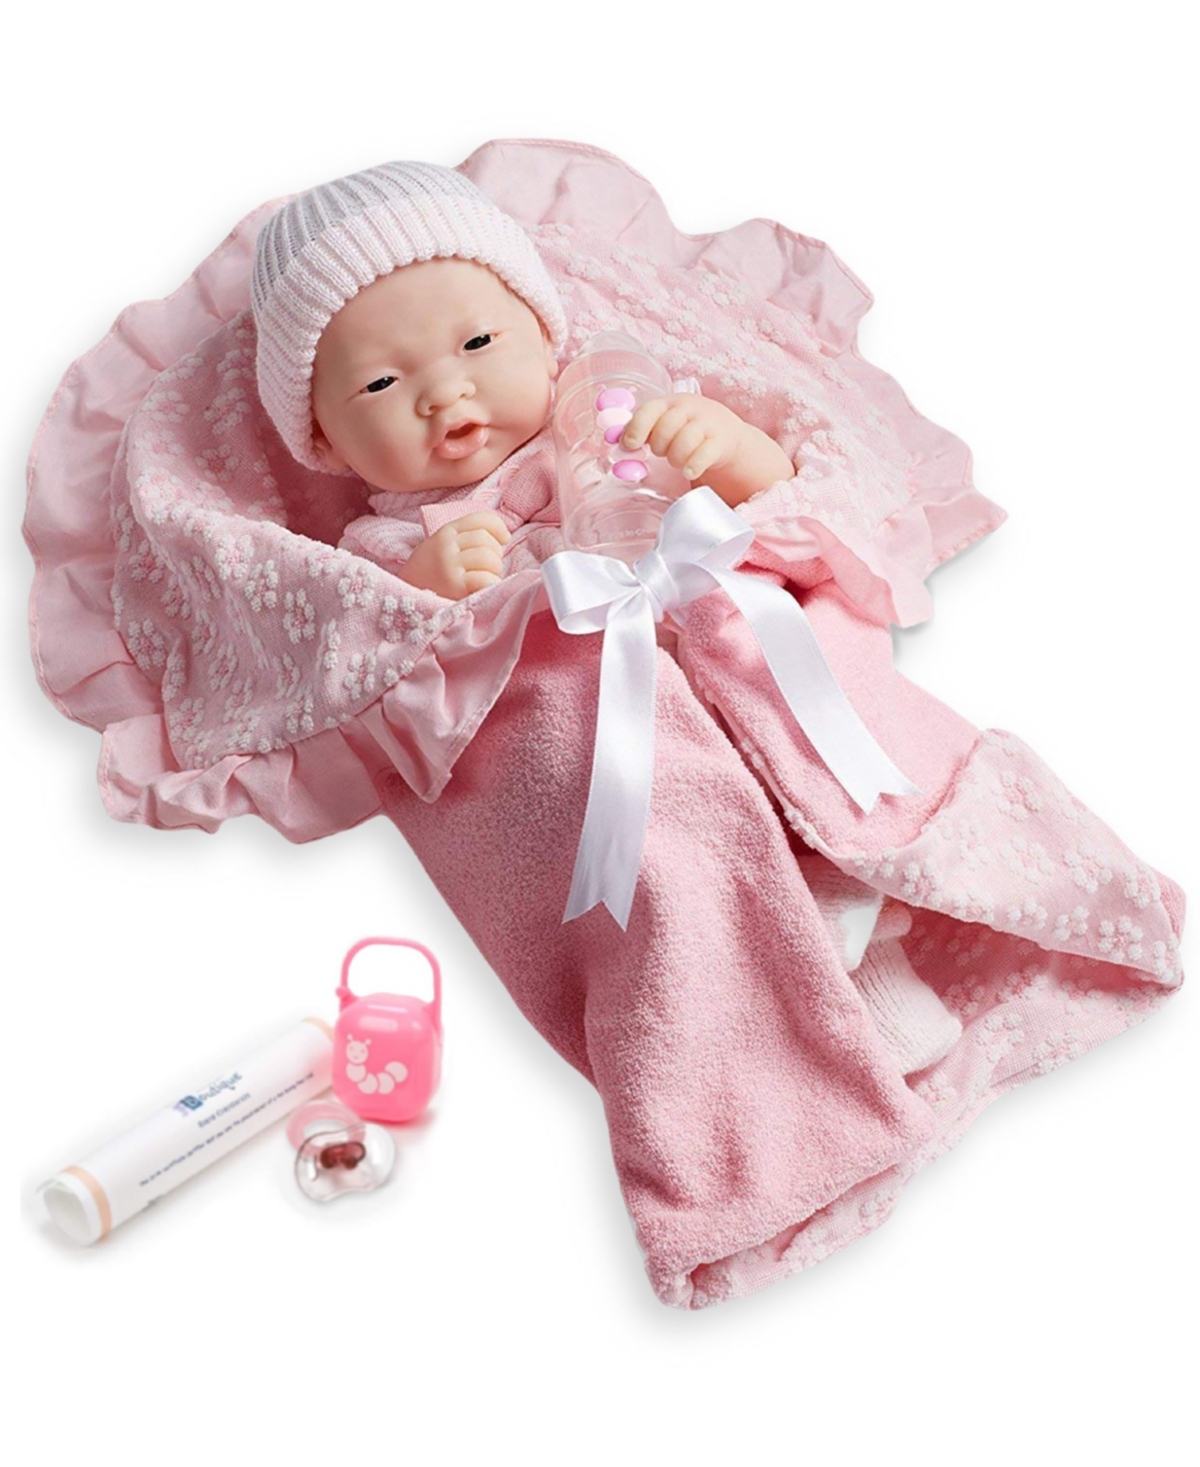 Jc Toys La Newborn Nursery 15.5" Asian Soft Body Baby Doll Pink Outfit In Asian - Pink